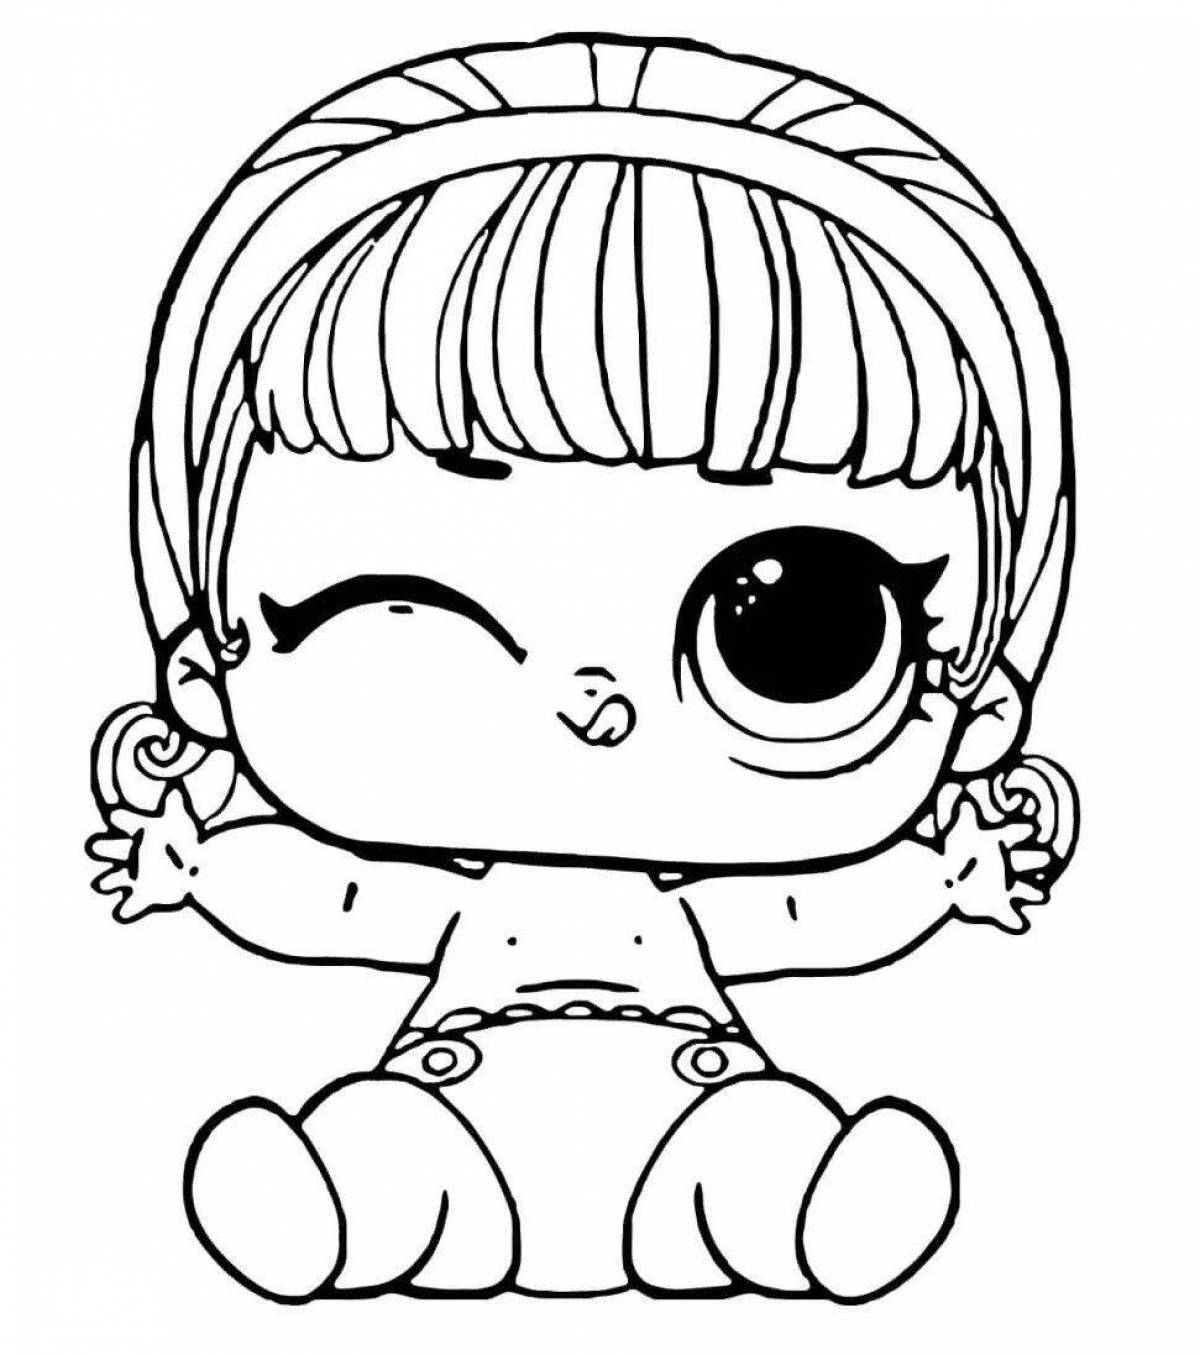 Creative coloring for lol dolls